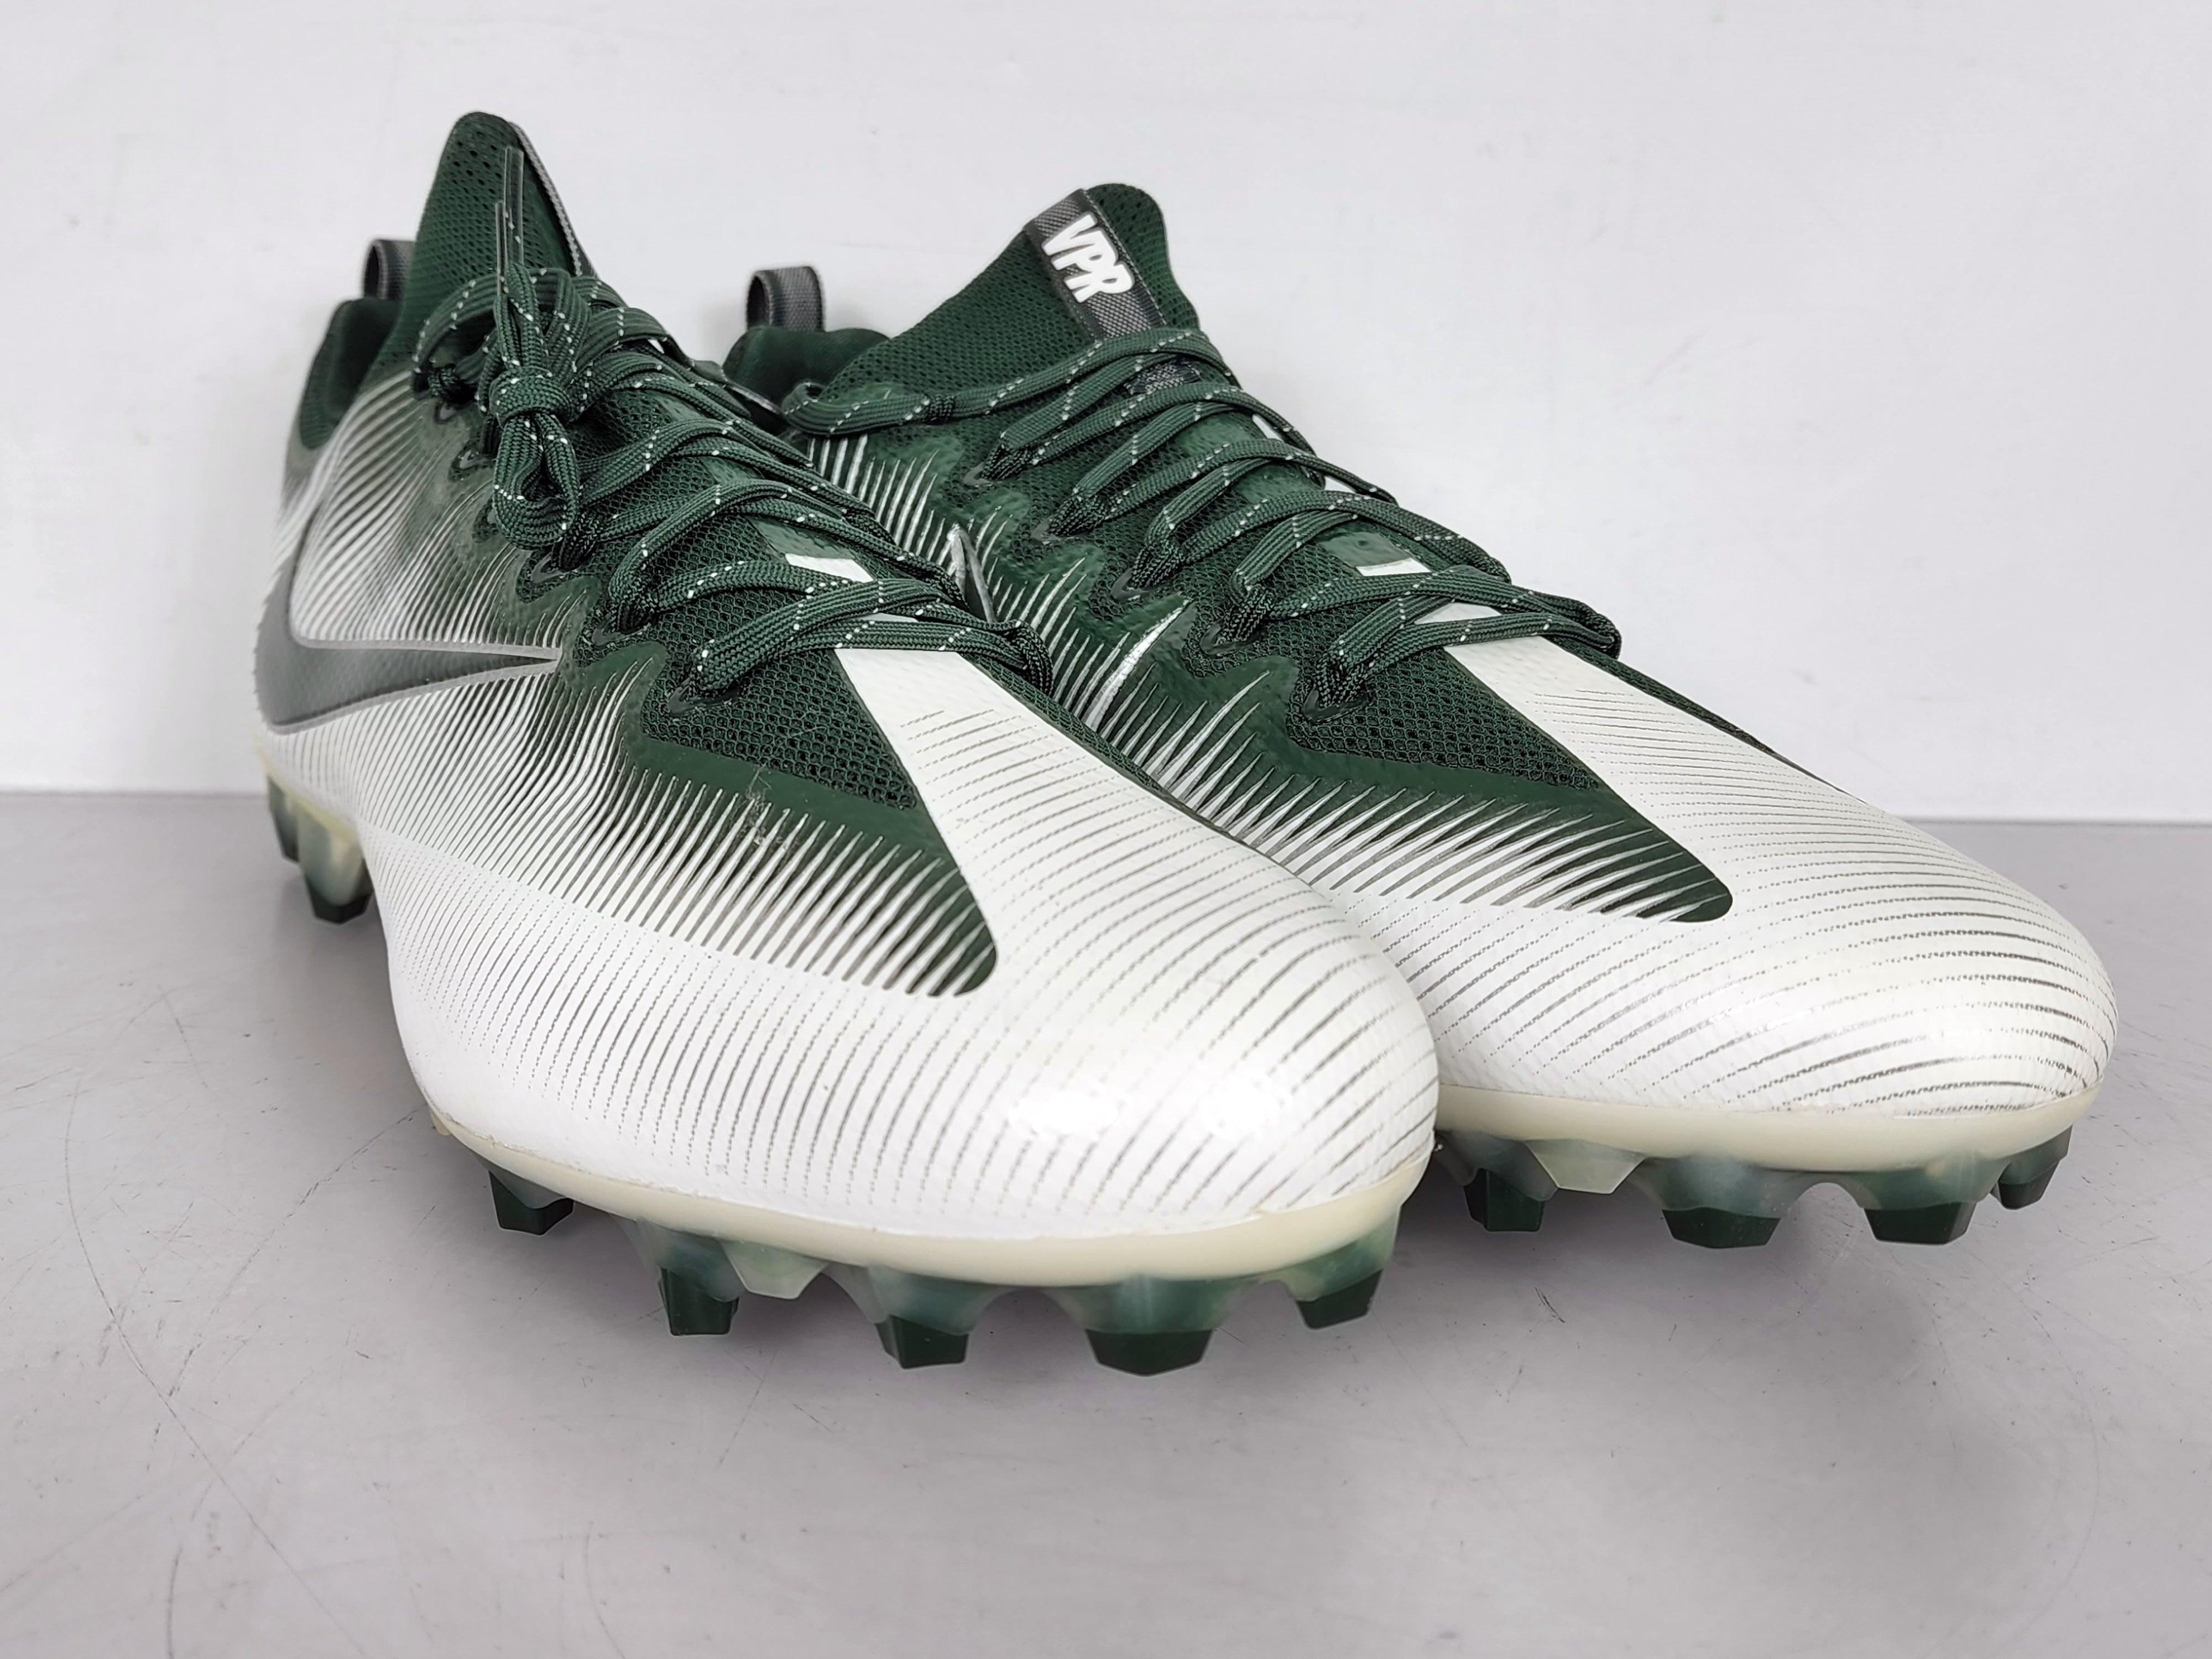 Nike Untouchable Pro Custom Supreme Cleats for Sale in Columbus